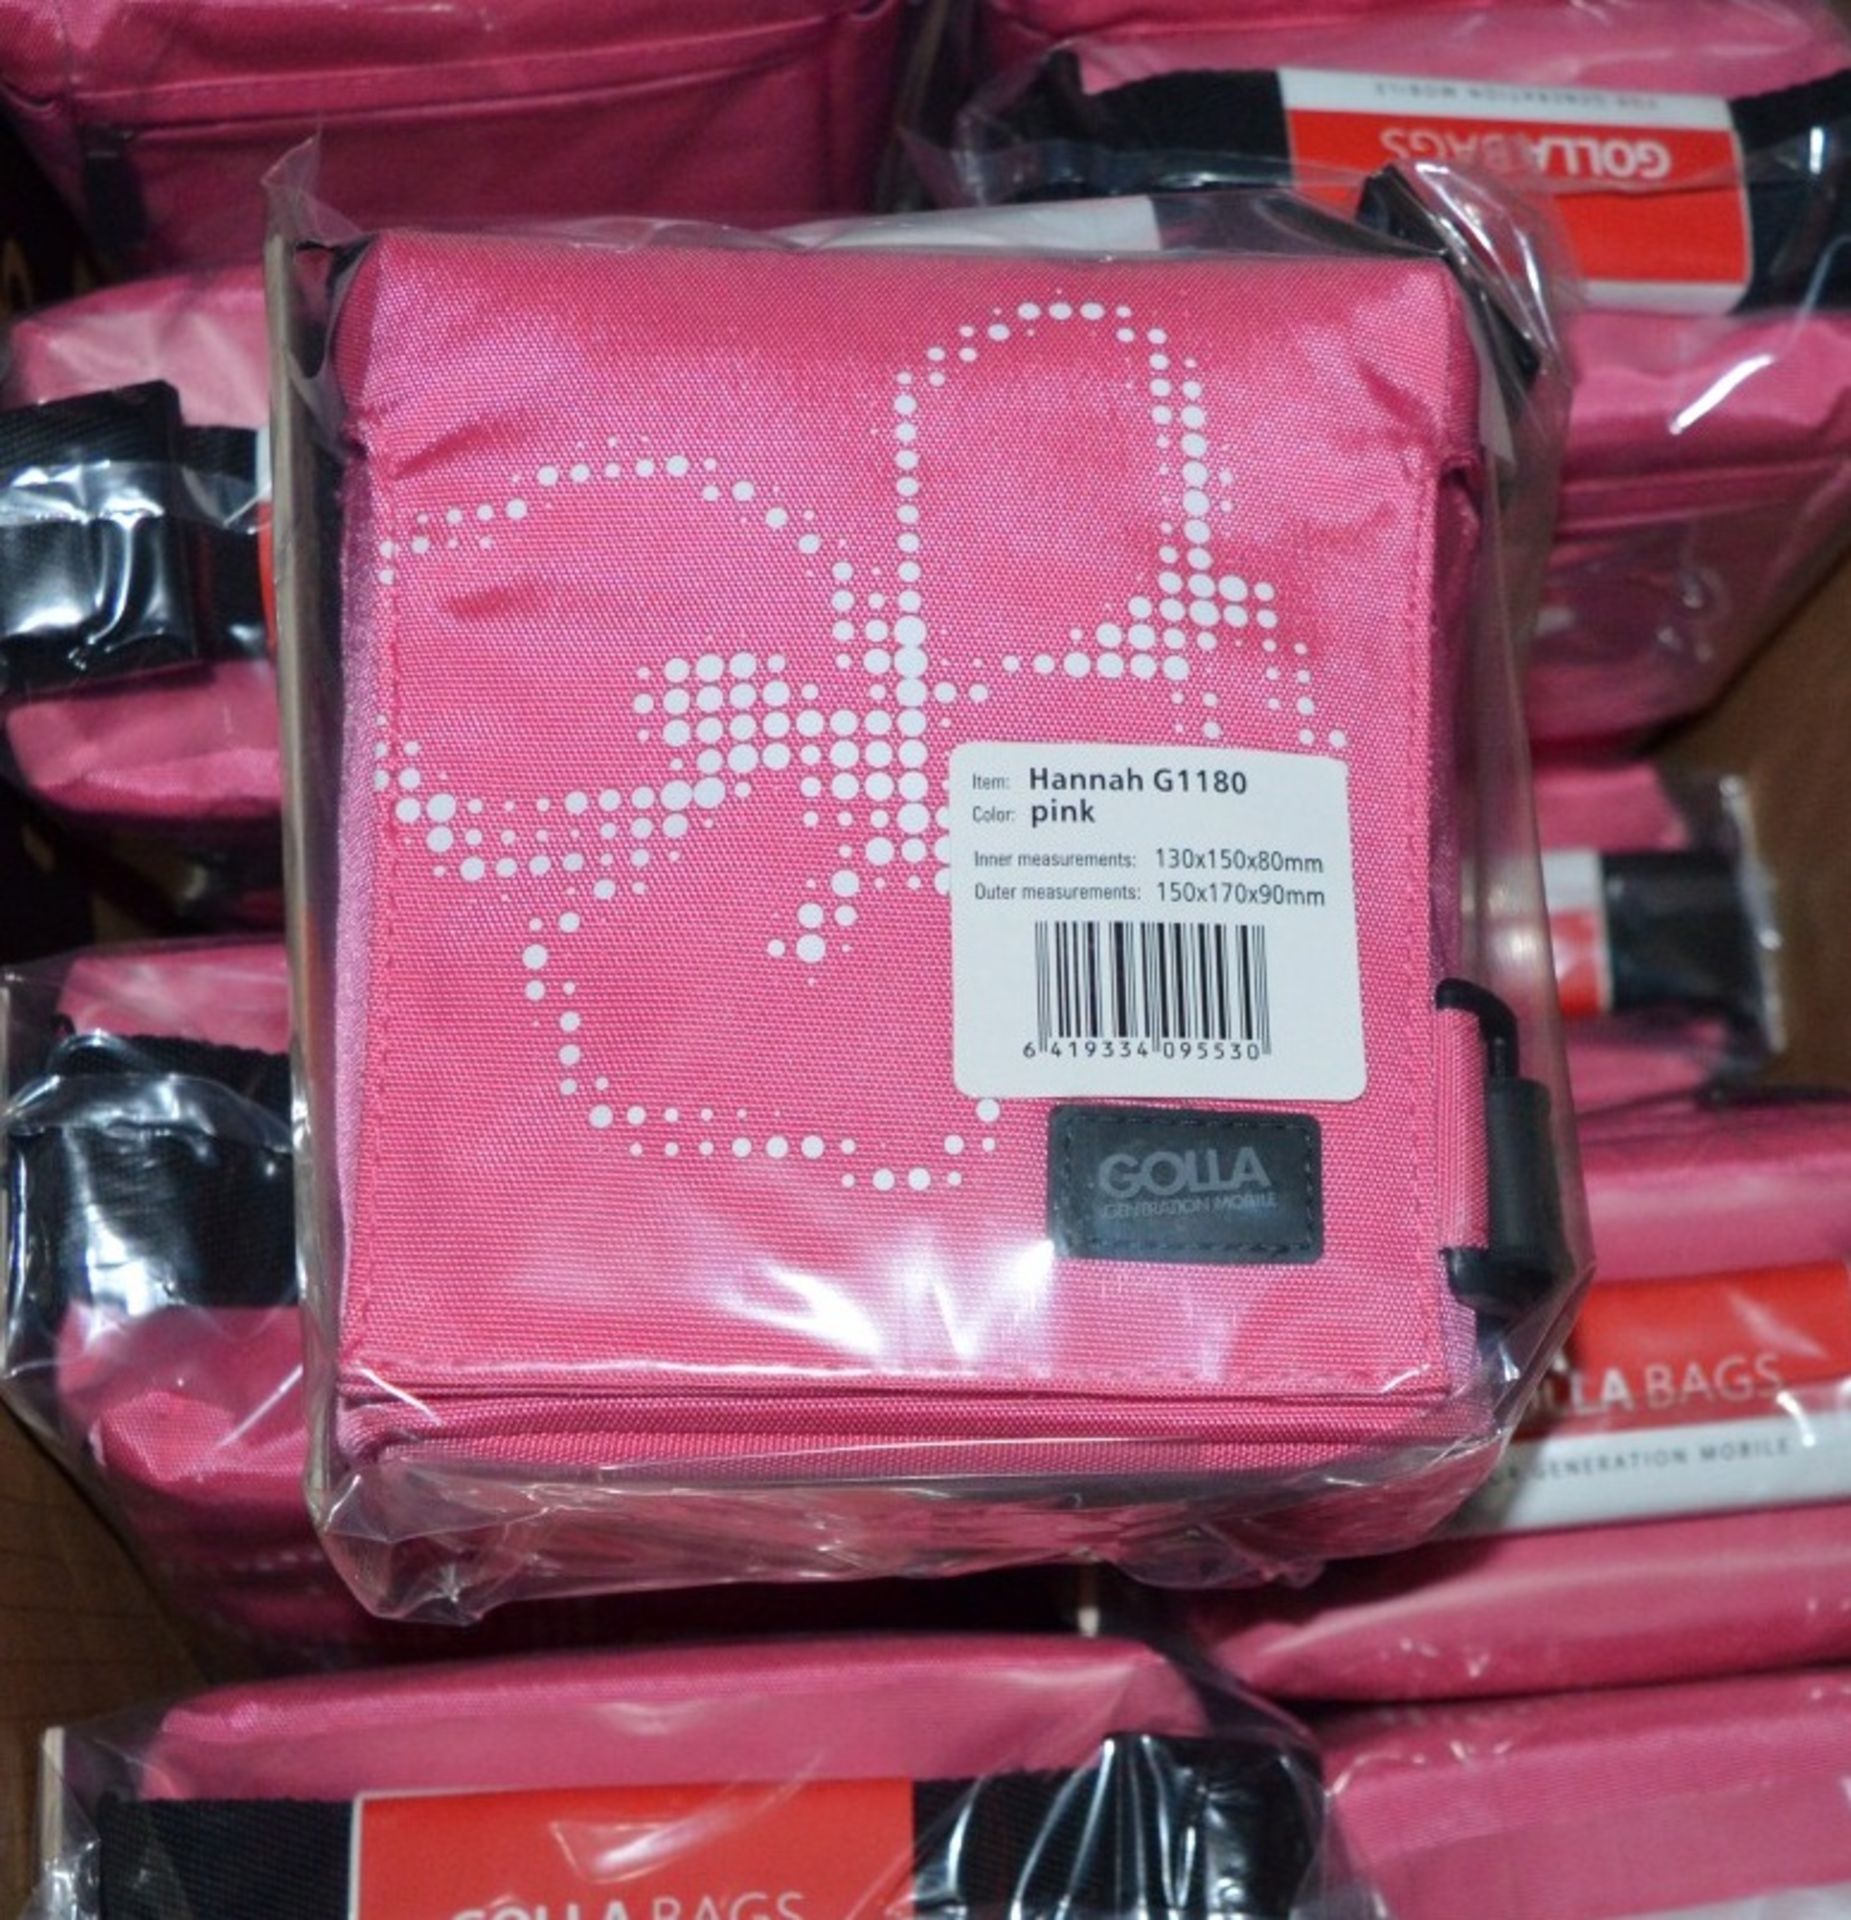 20 x GOLLA Small Camera Bags In Bright Pink - New / Unused Stock - Great Resale Potential - Supplied